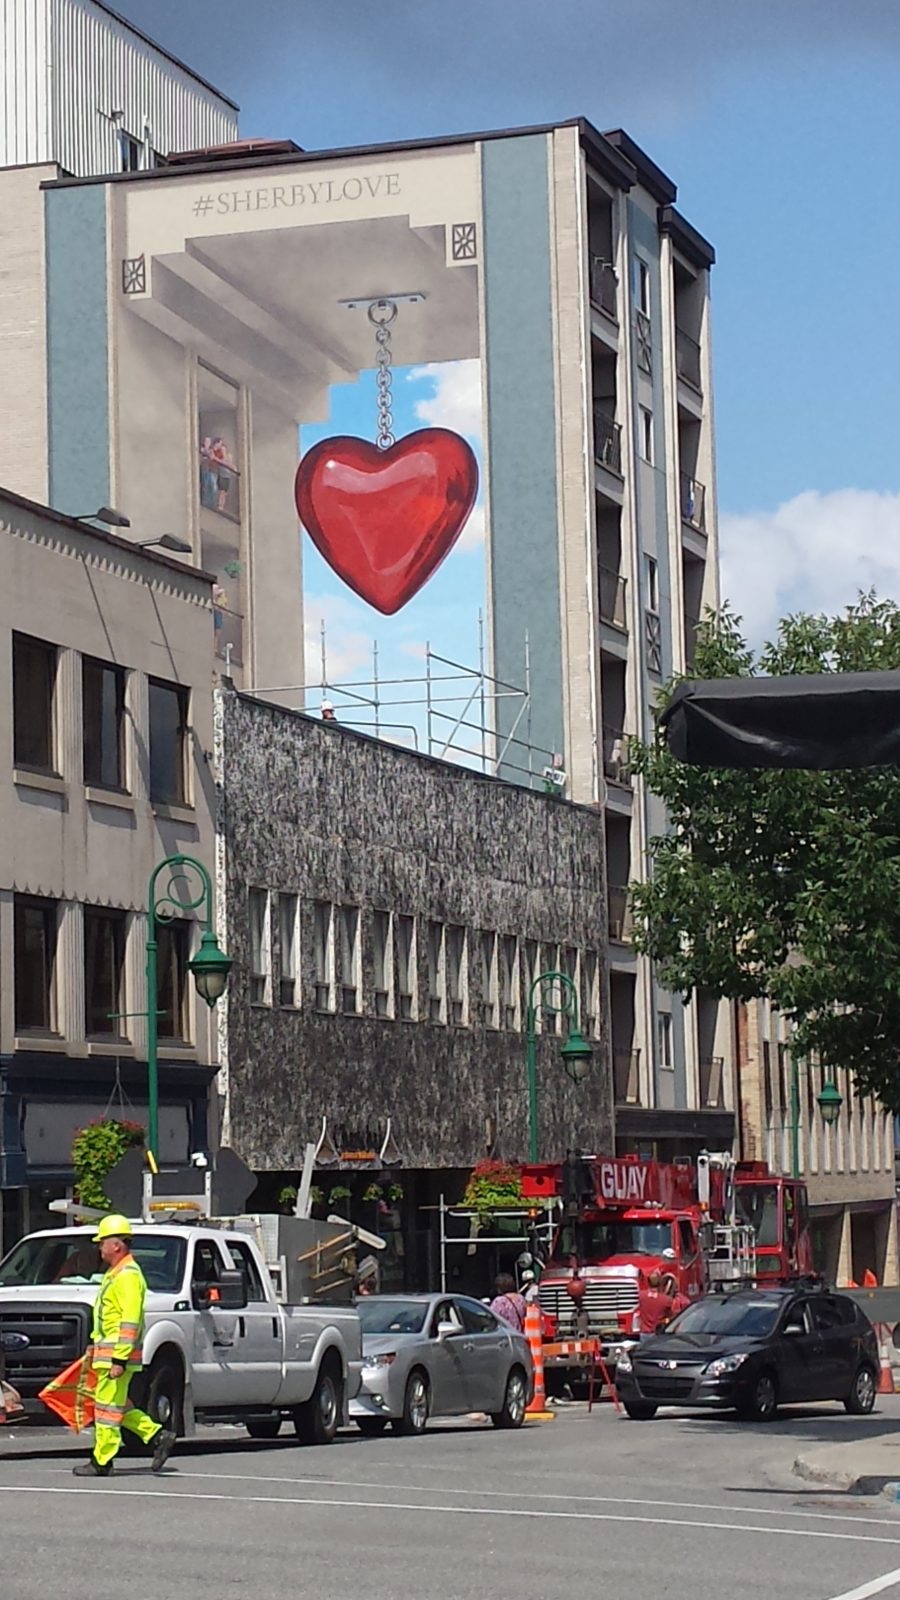 New downtown mural bringing the #sherbylove